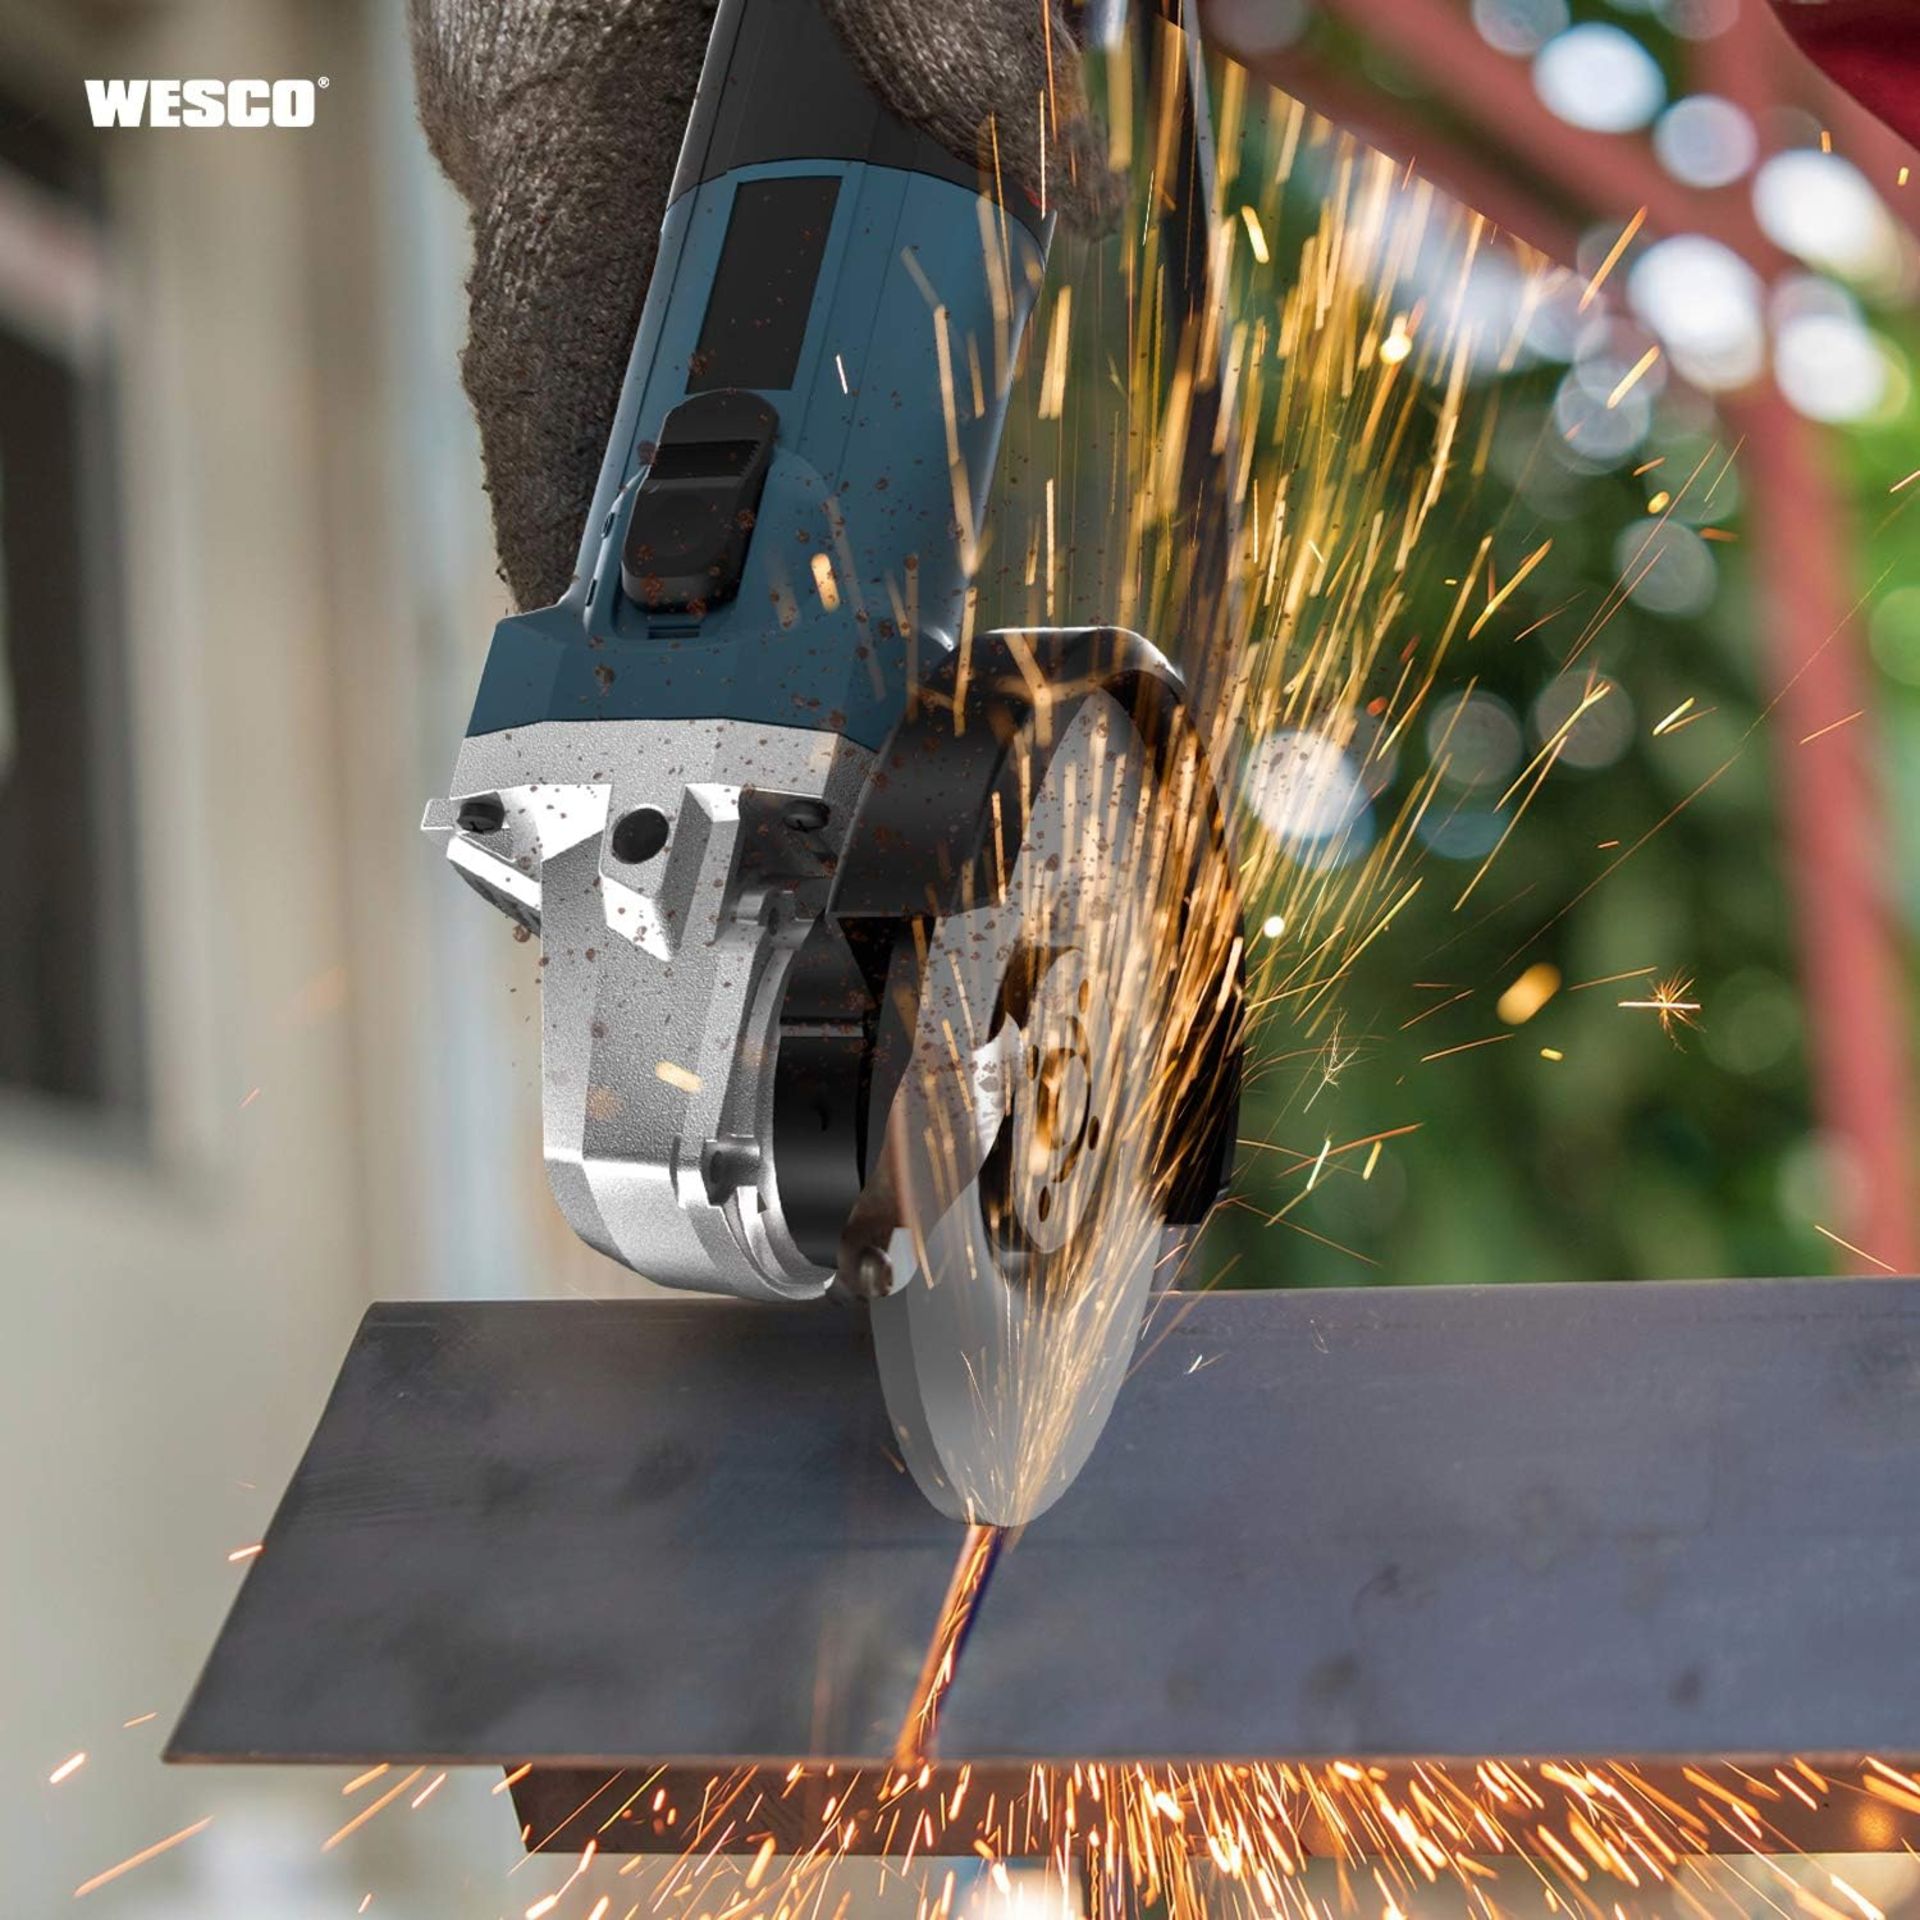 2x NEW & BOXED WESCO 750W 115mm Professional Angle Grinder. RRP £39.99 EACH. Powerful angle grinder: - Image 6 of 6